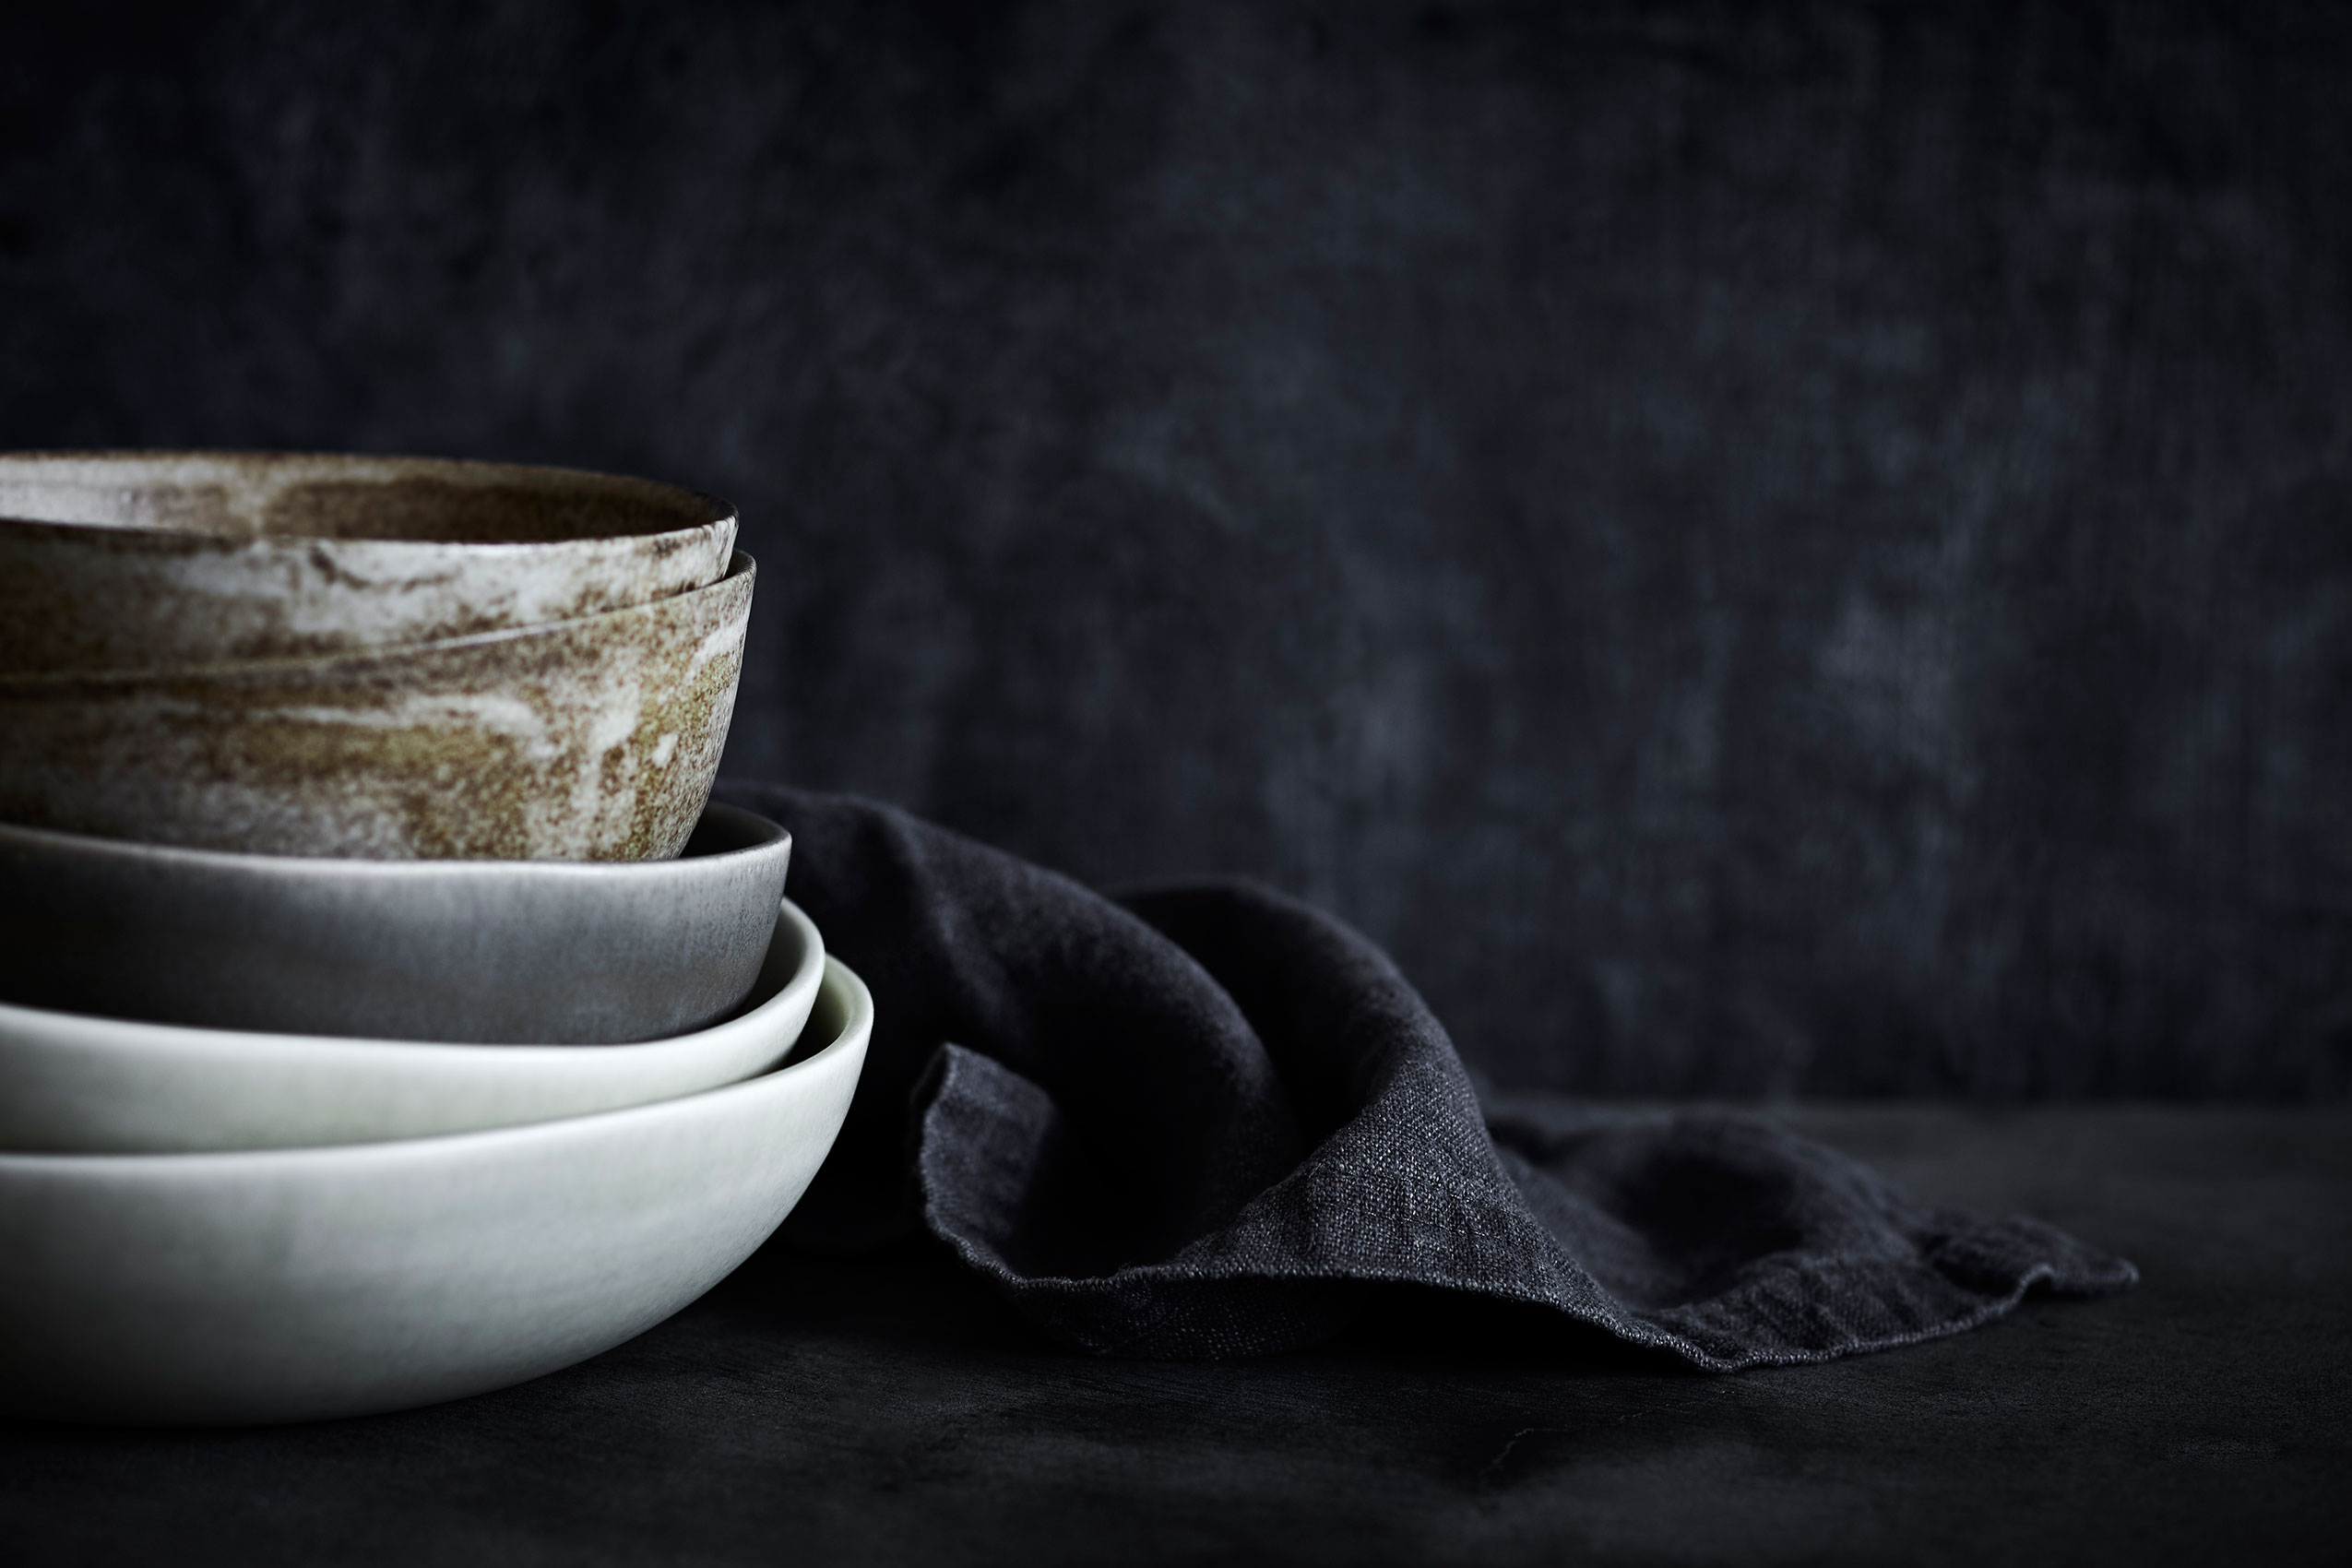 Slow Cooked • Textured Neutral Stoneware Bowls on Dark Table • Cookbook & Editorial Food Photography